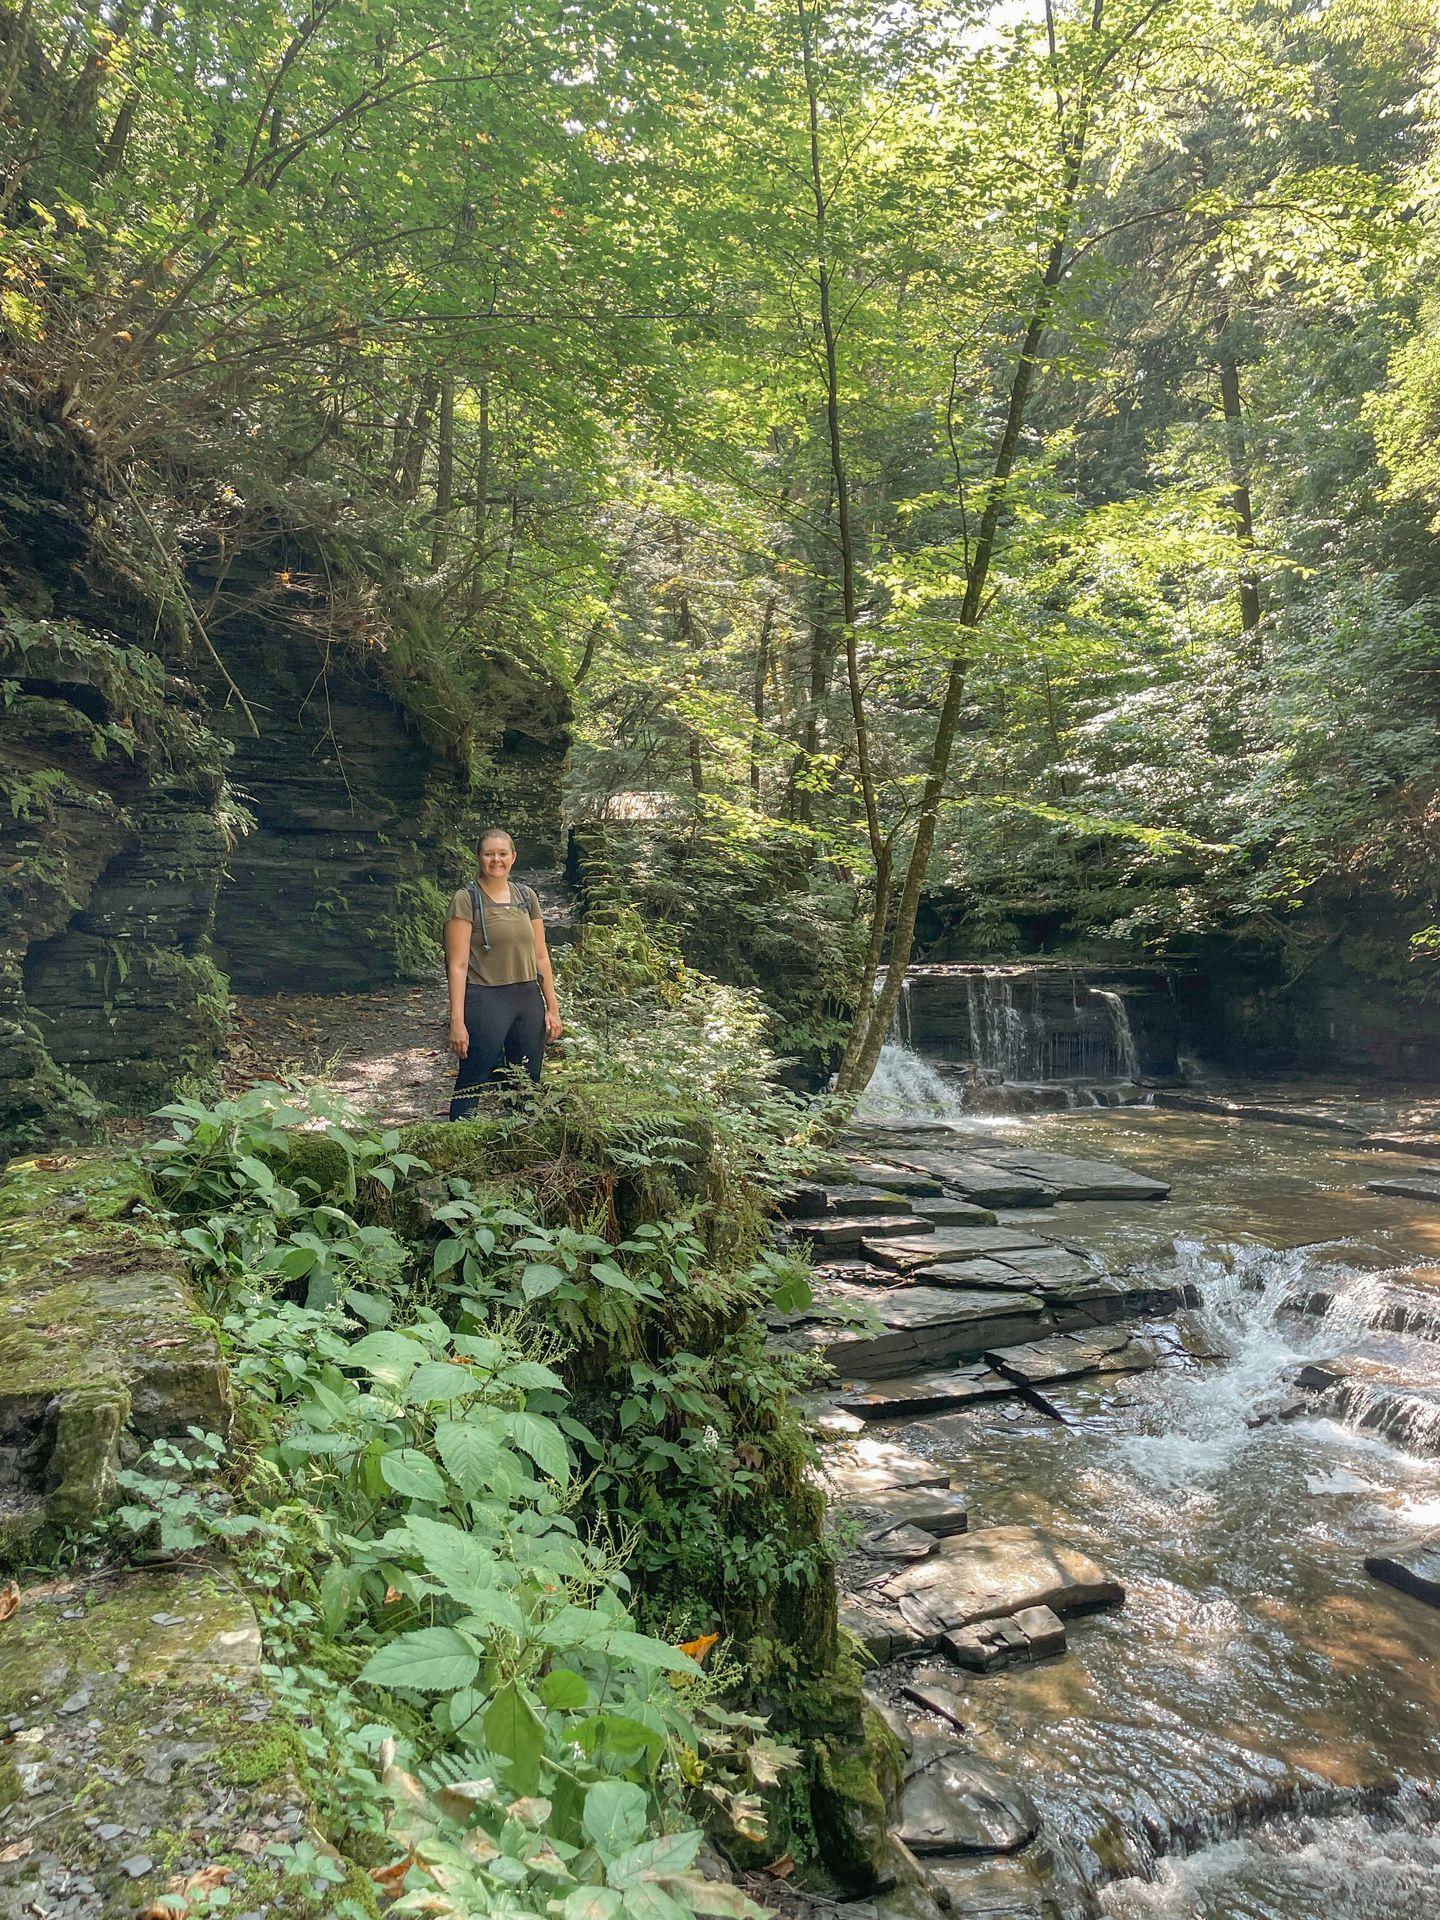 Lydia standing on a trail in Fillmore Glen. The path is covered in green moss and vines and there is a stream with a waterfall to the right.